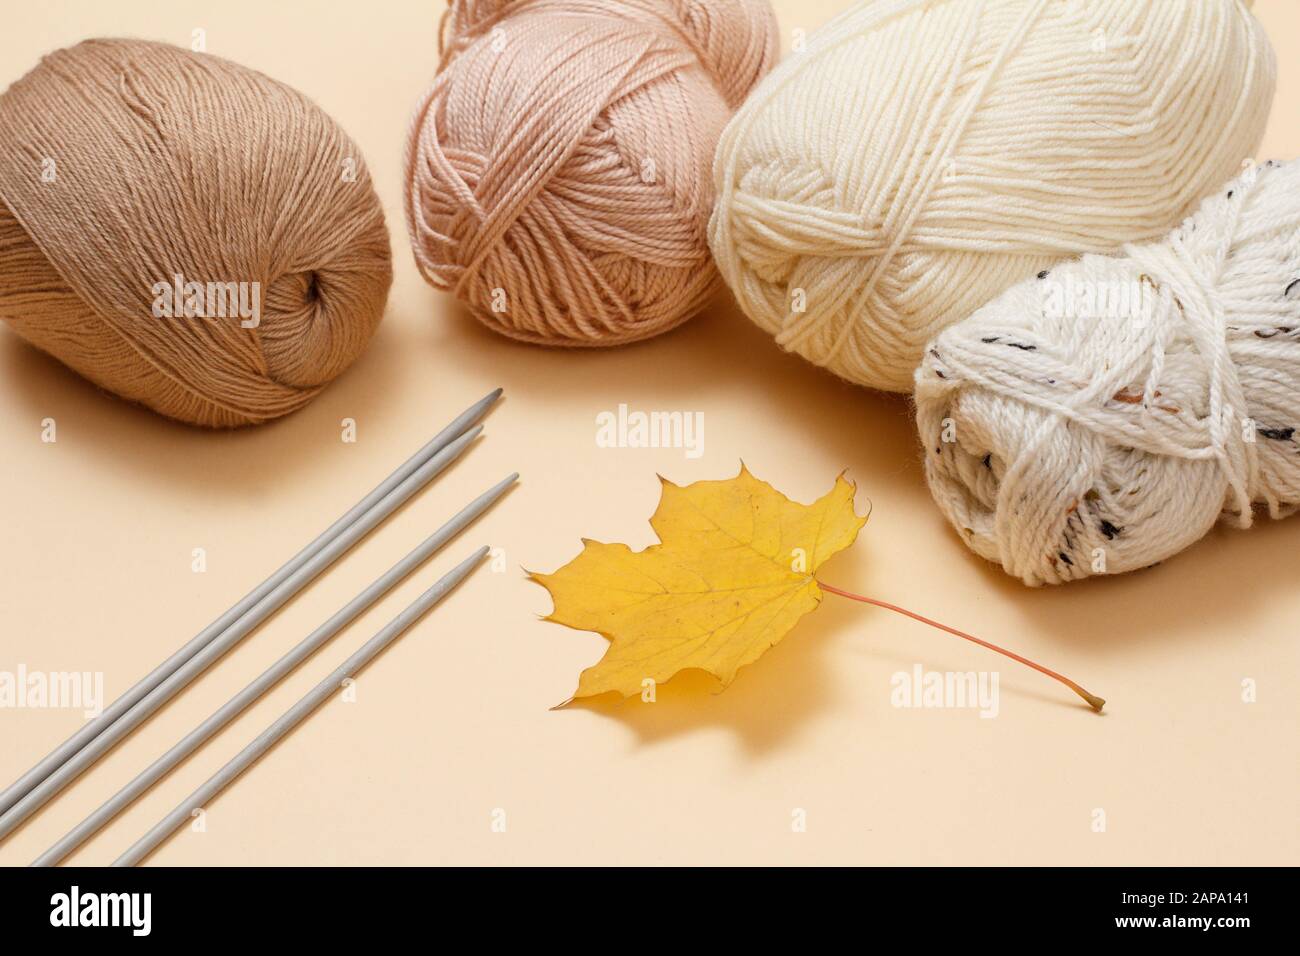 Knitting yarn balls, metal knitting needles and dry maple leaf on a beige background. Knitting concept. Top view. Stock Photo